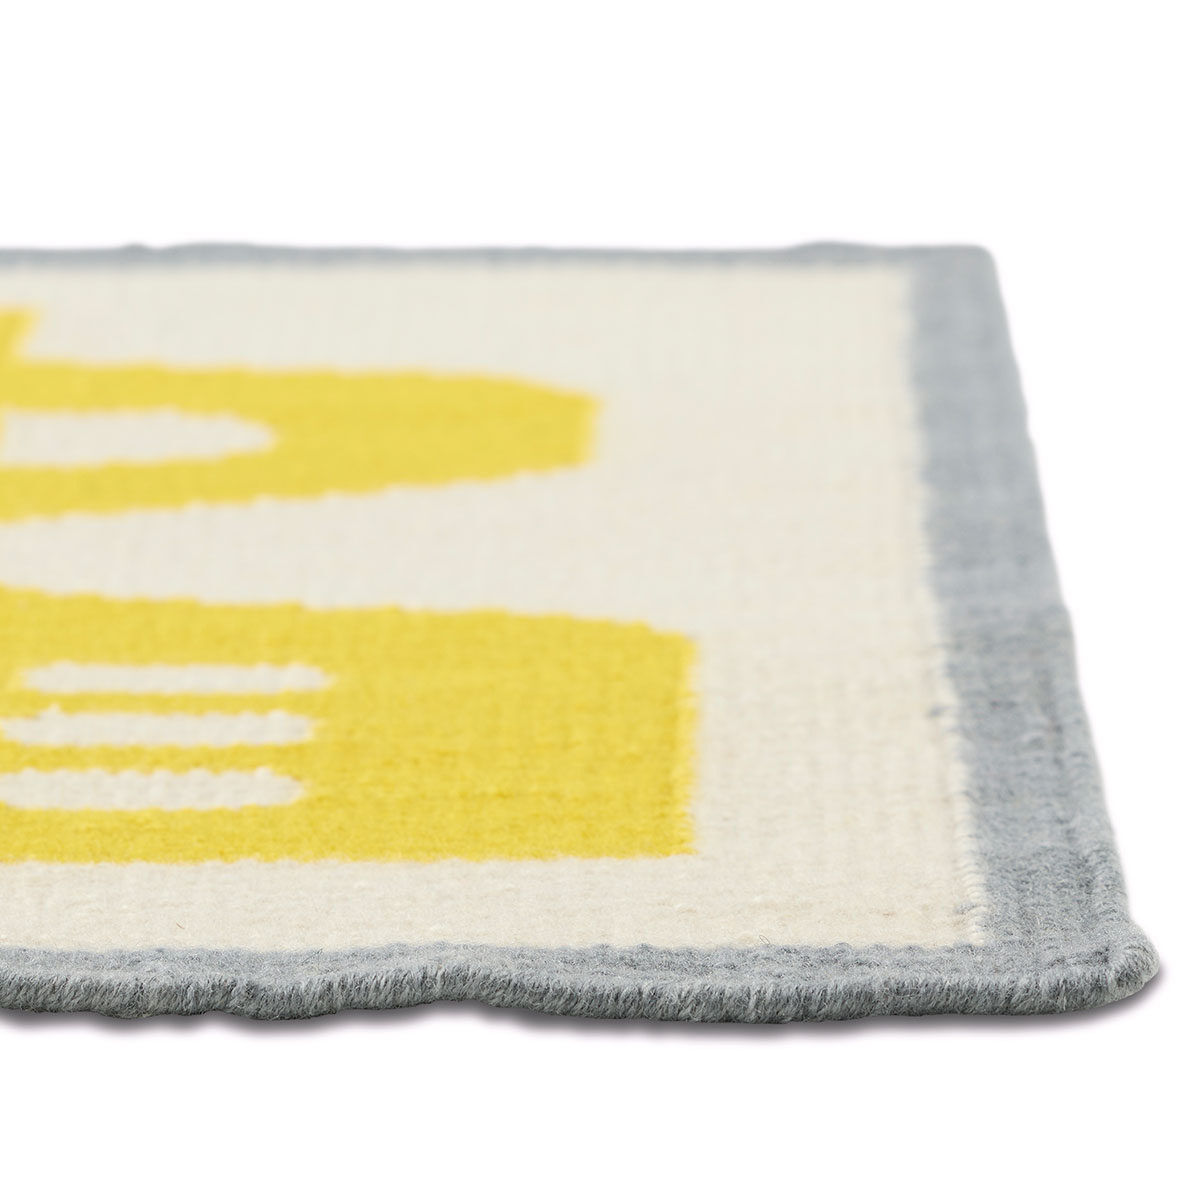 The corner of an abstract yellow and gray rug.